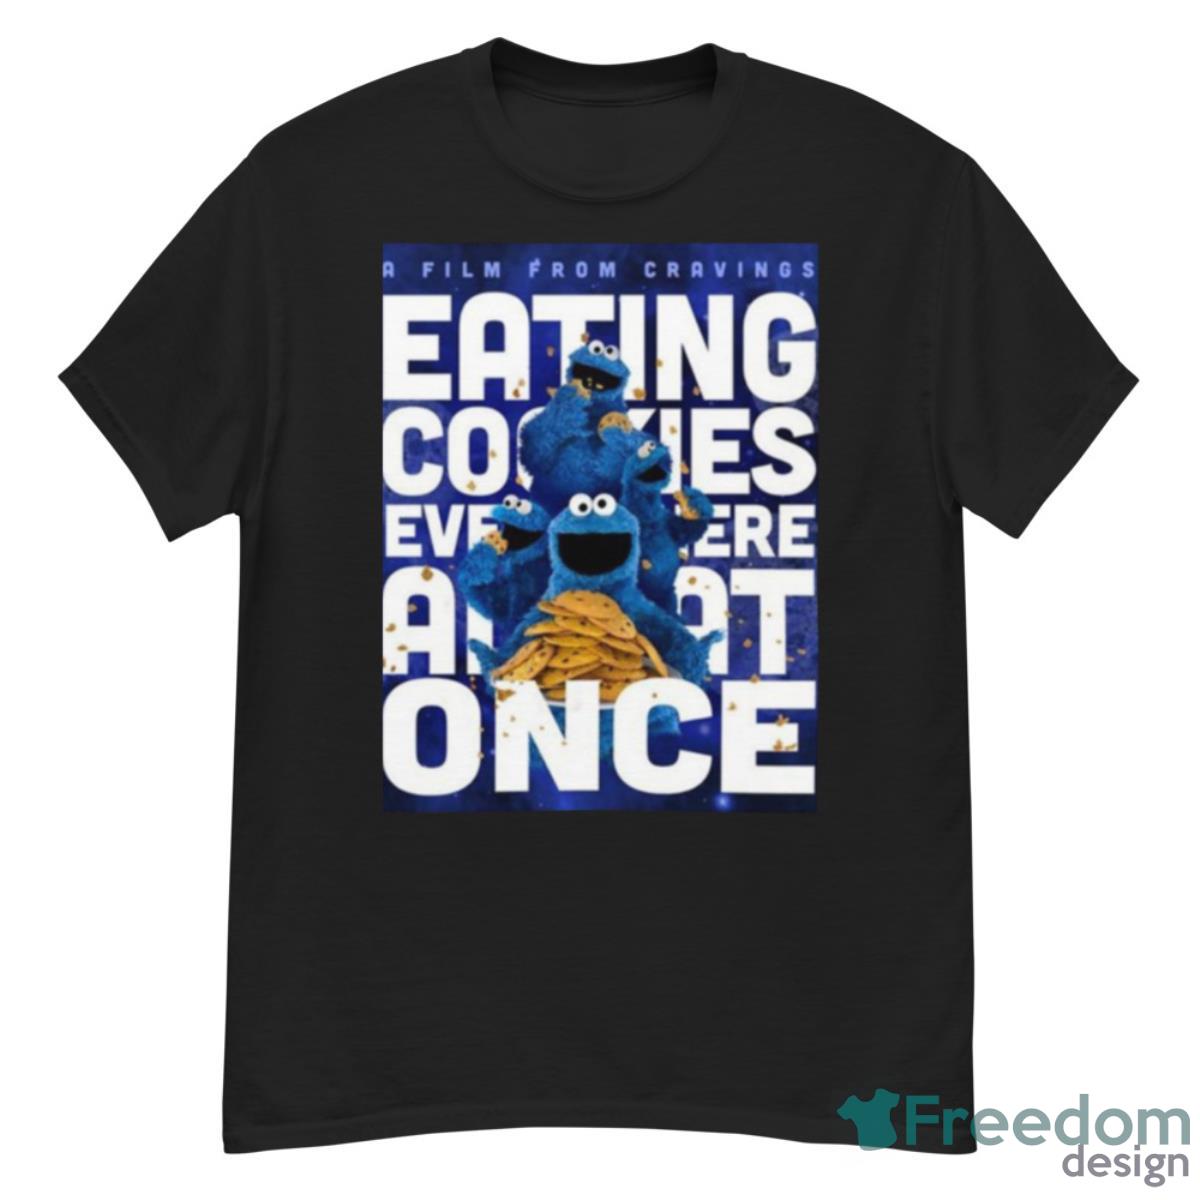 A Film From Cravings Eating Cookies Everywhere AAt Once Shirt - G500 Men’s Classic T-Shirt